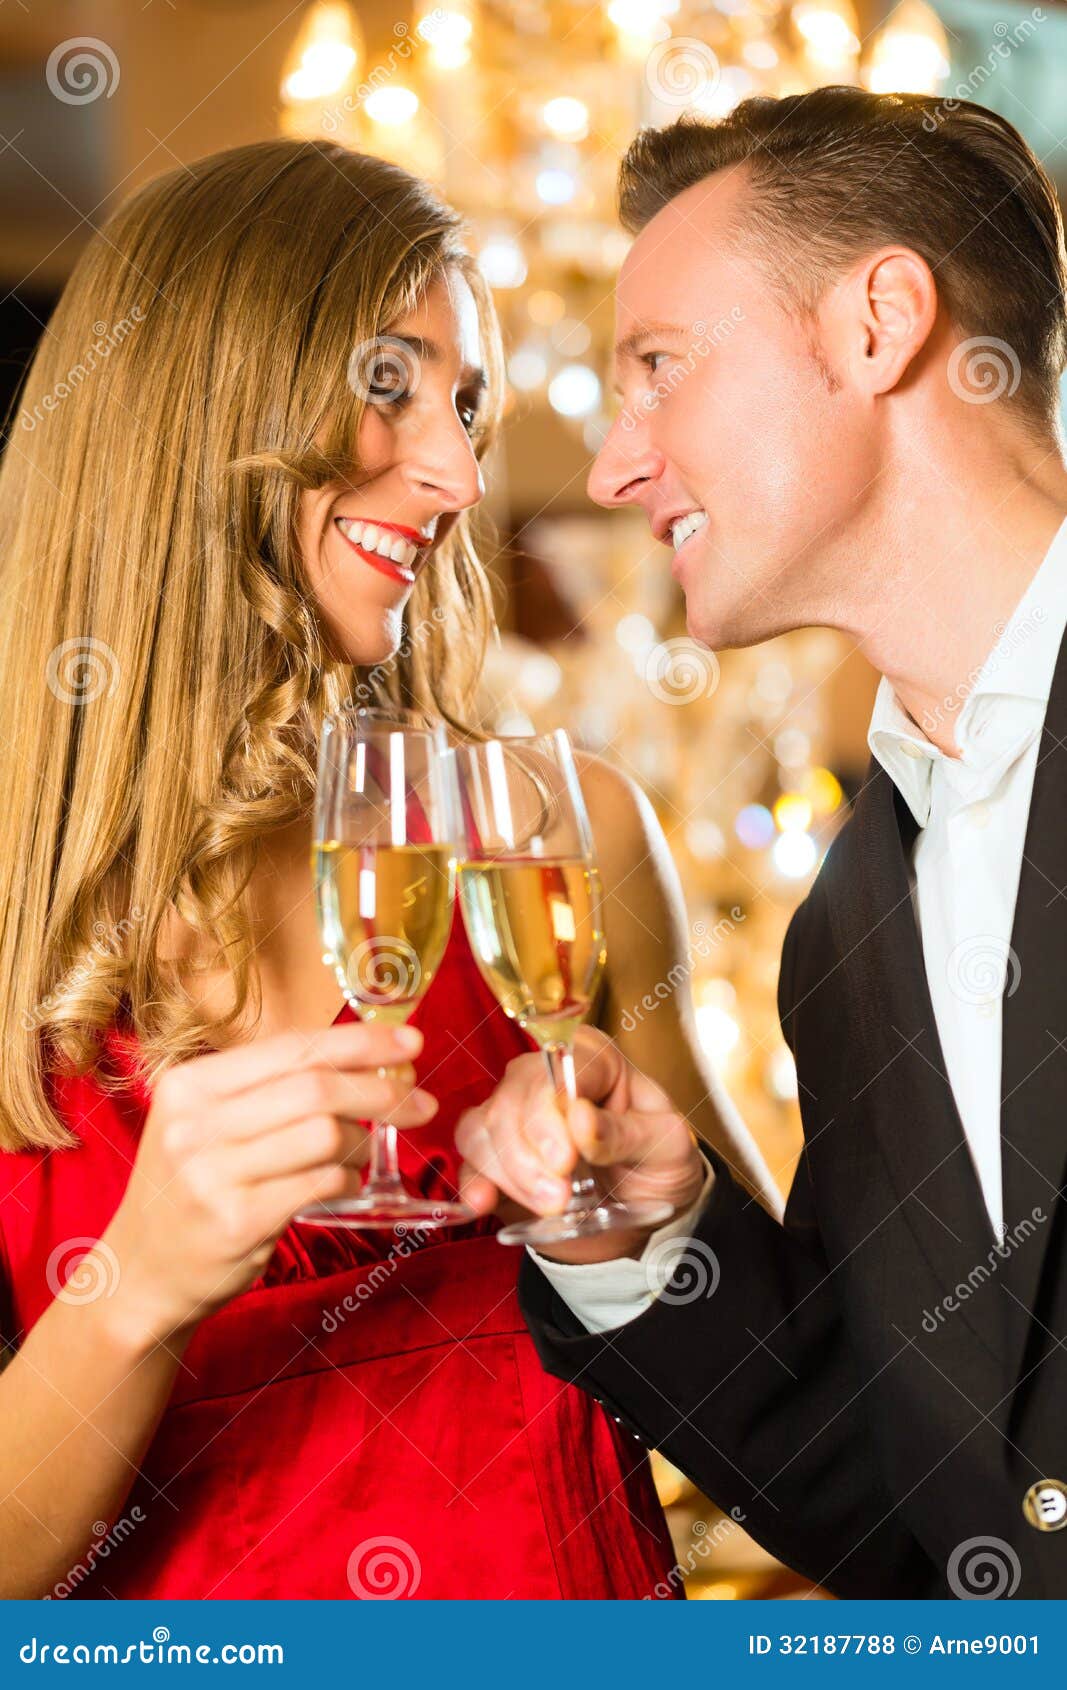 alcoholics dating each other